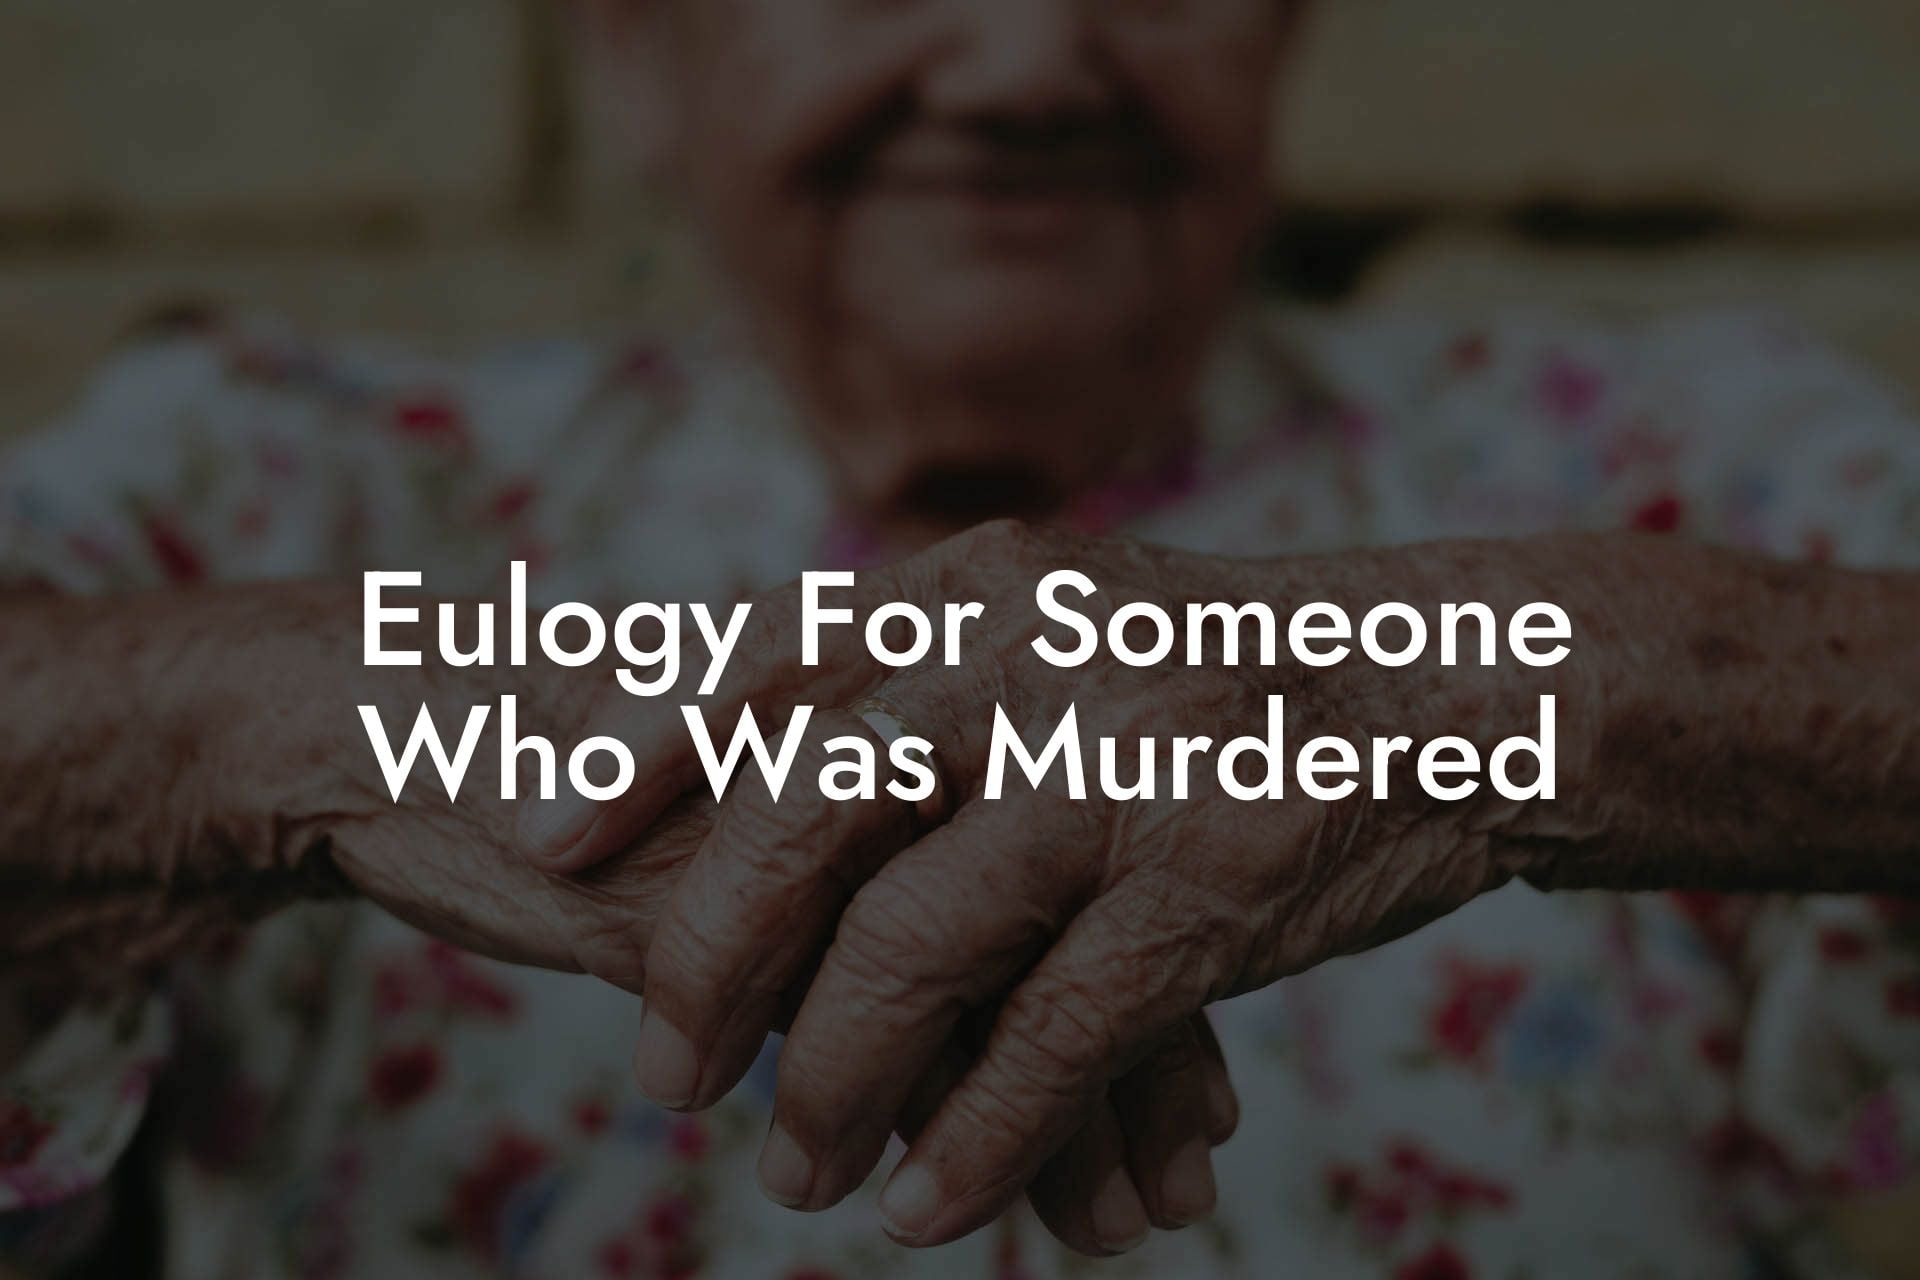 Eulogy For Someone Who Was Murdered